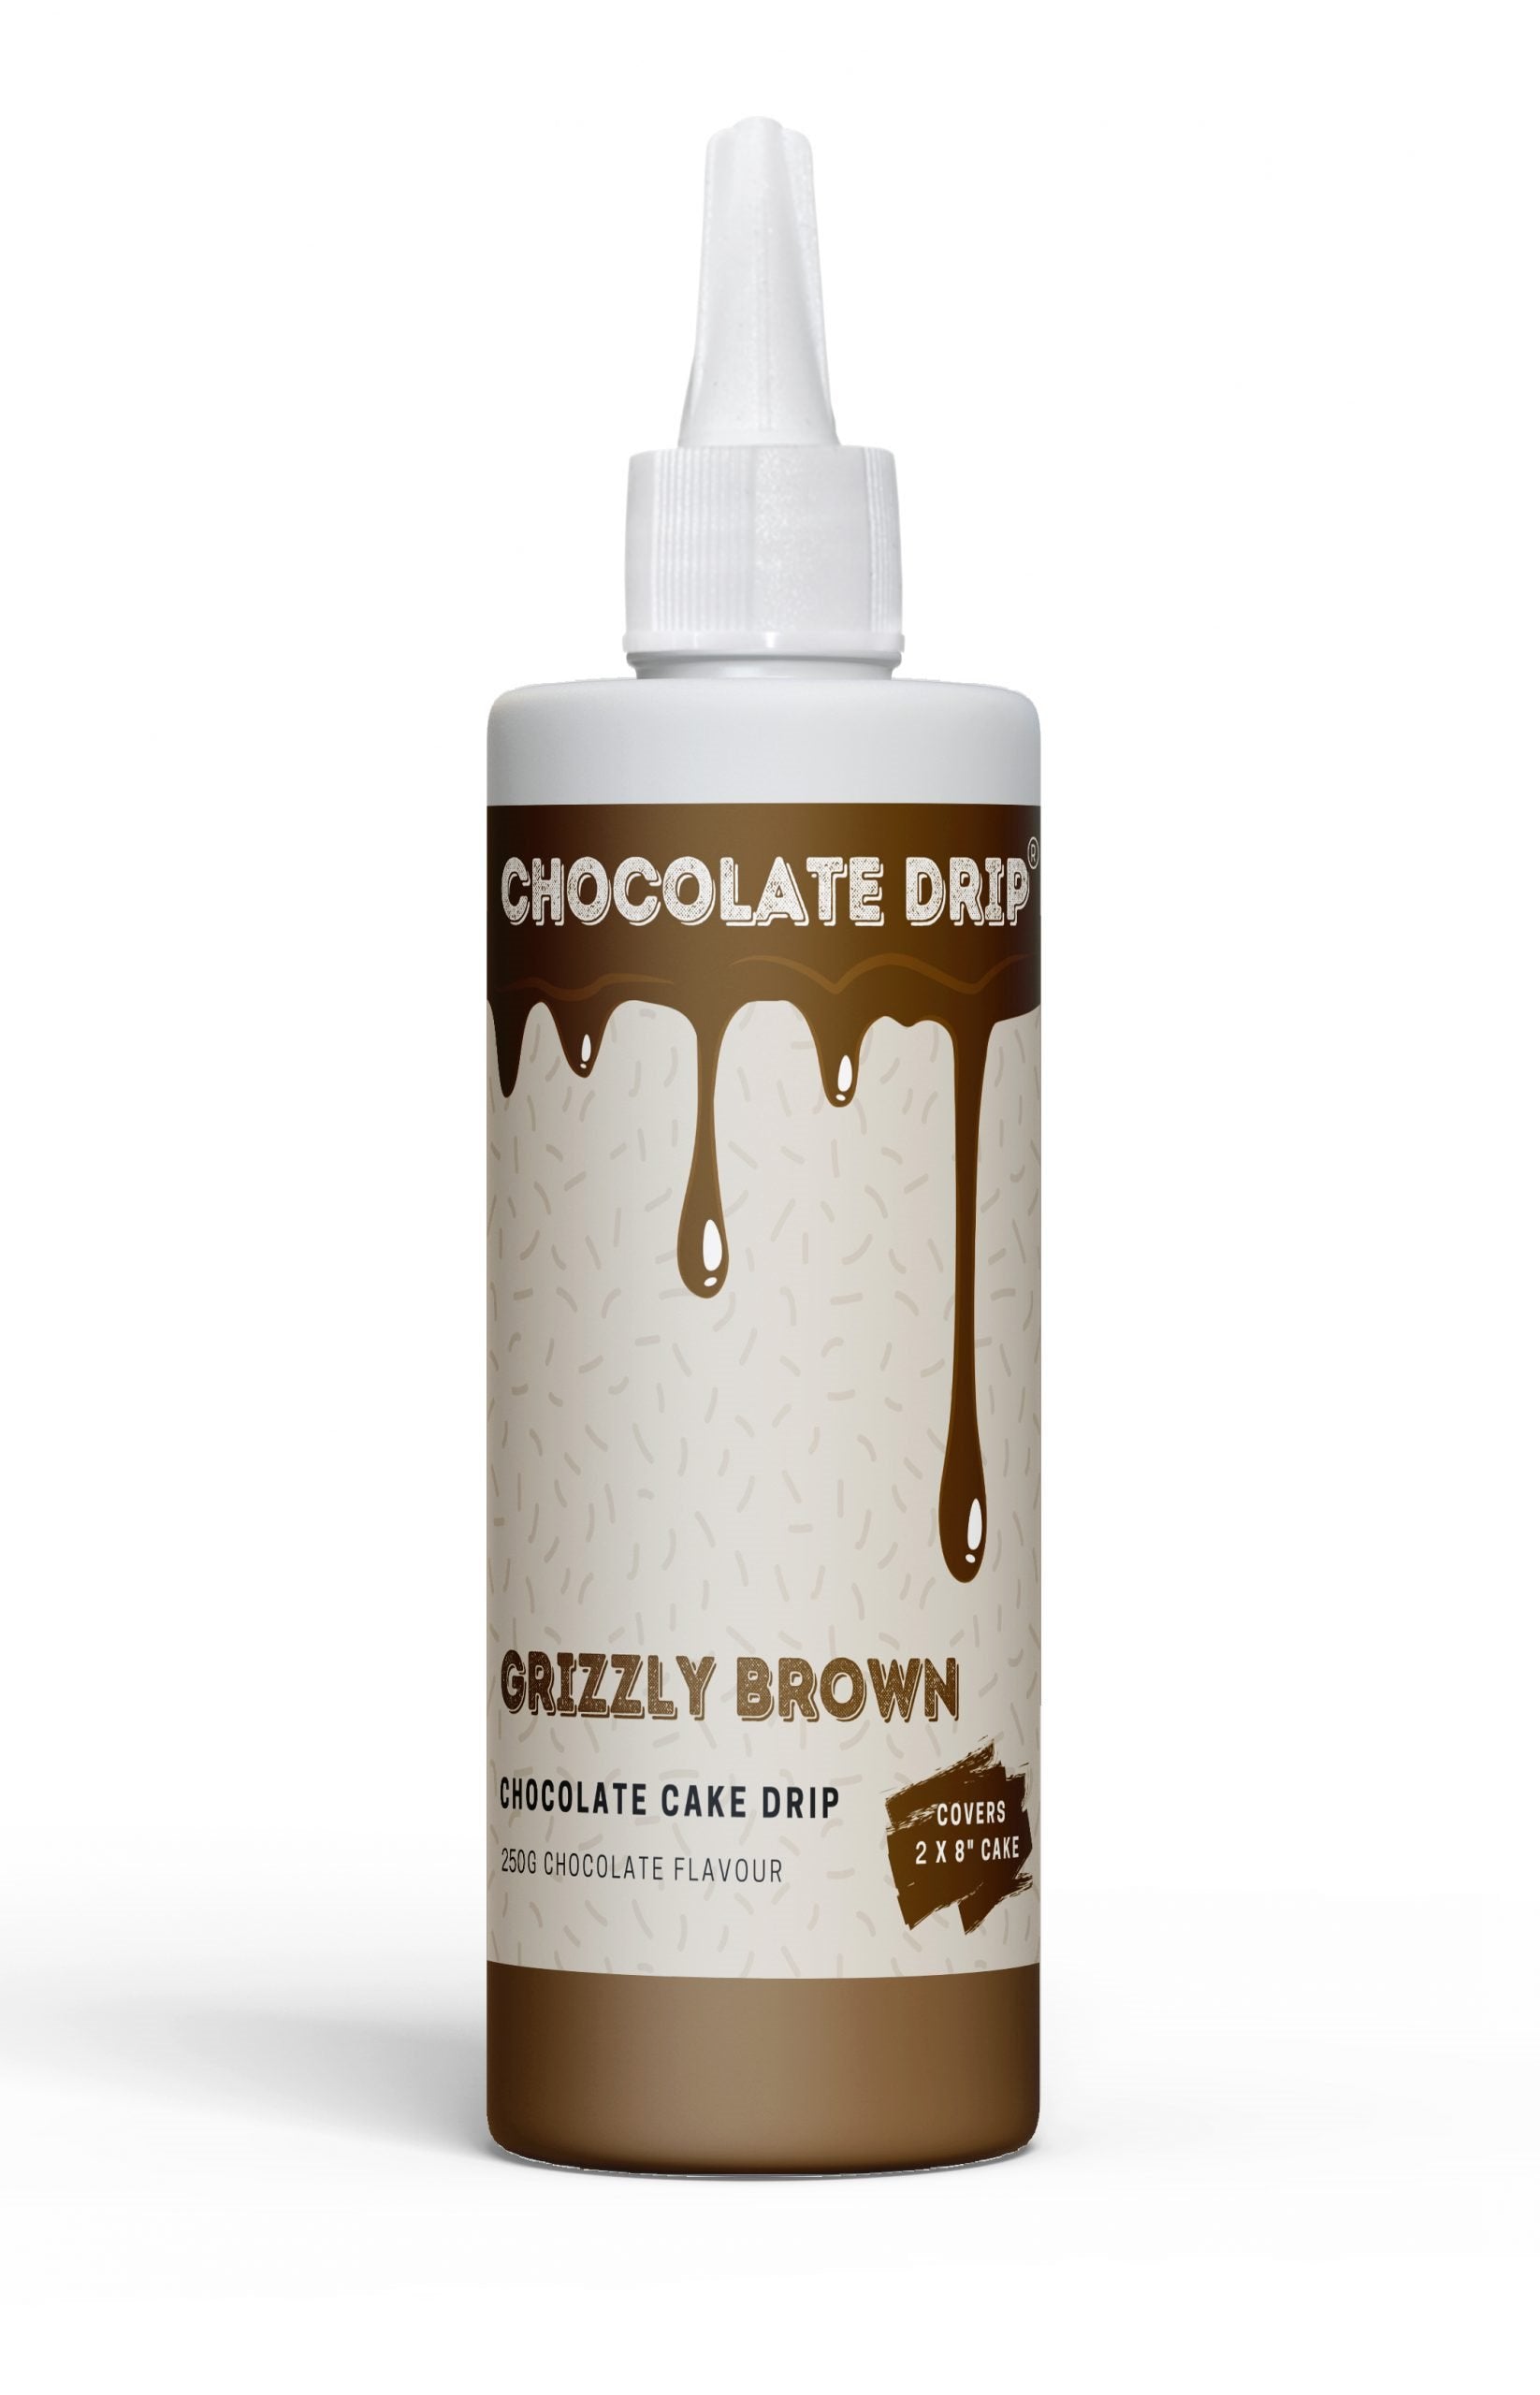 Chocolate Drip Grizzly Brown 250g